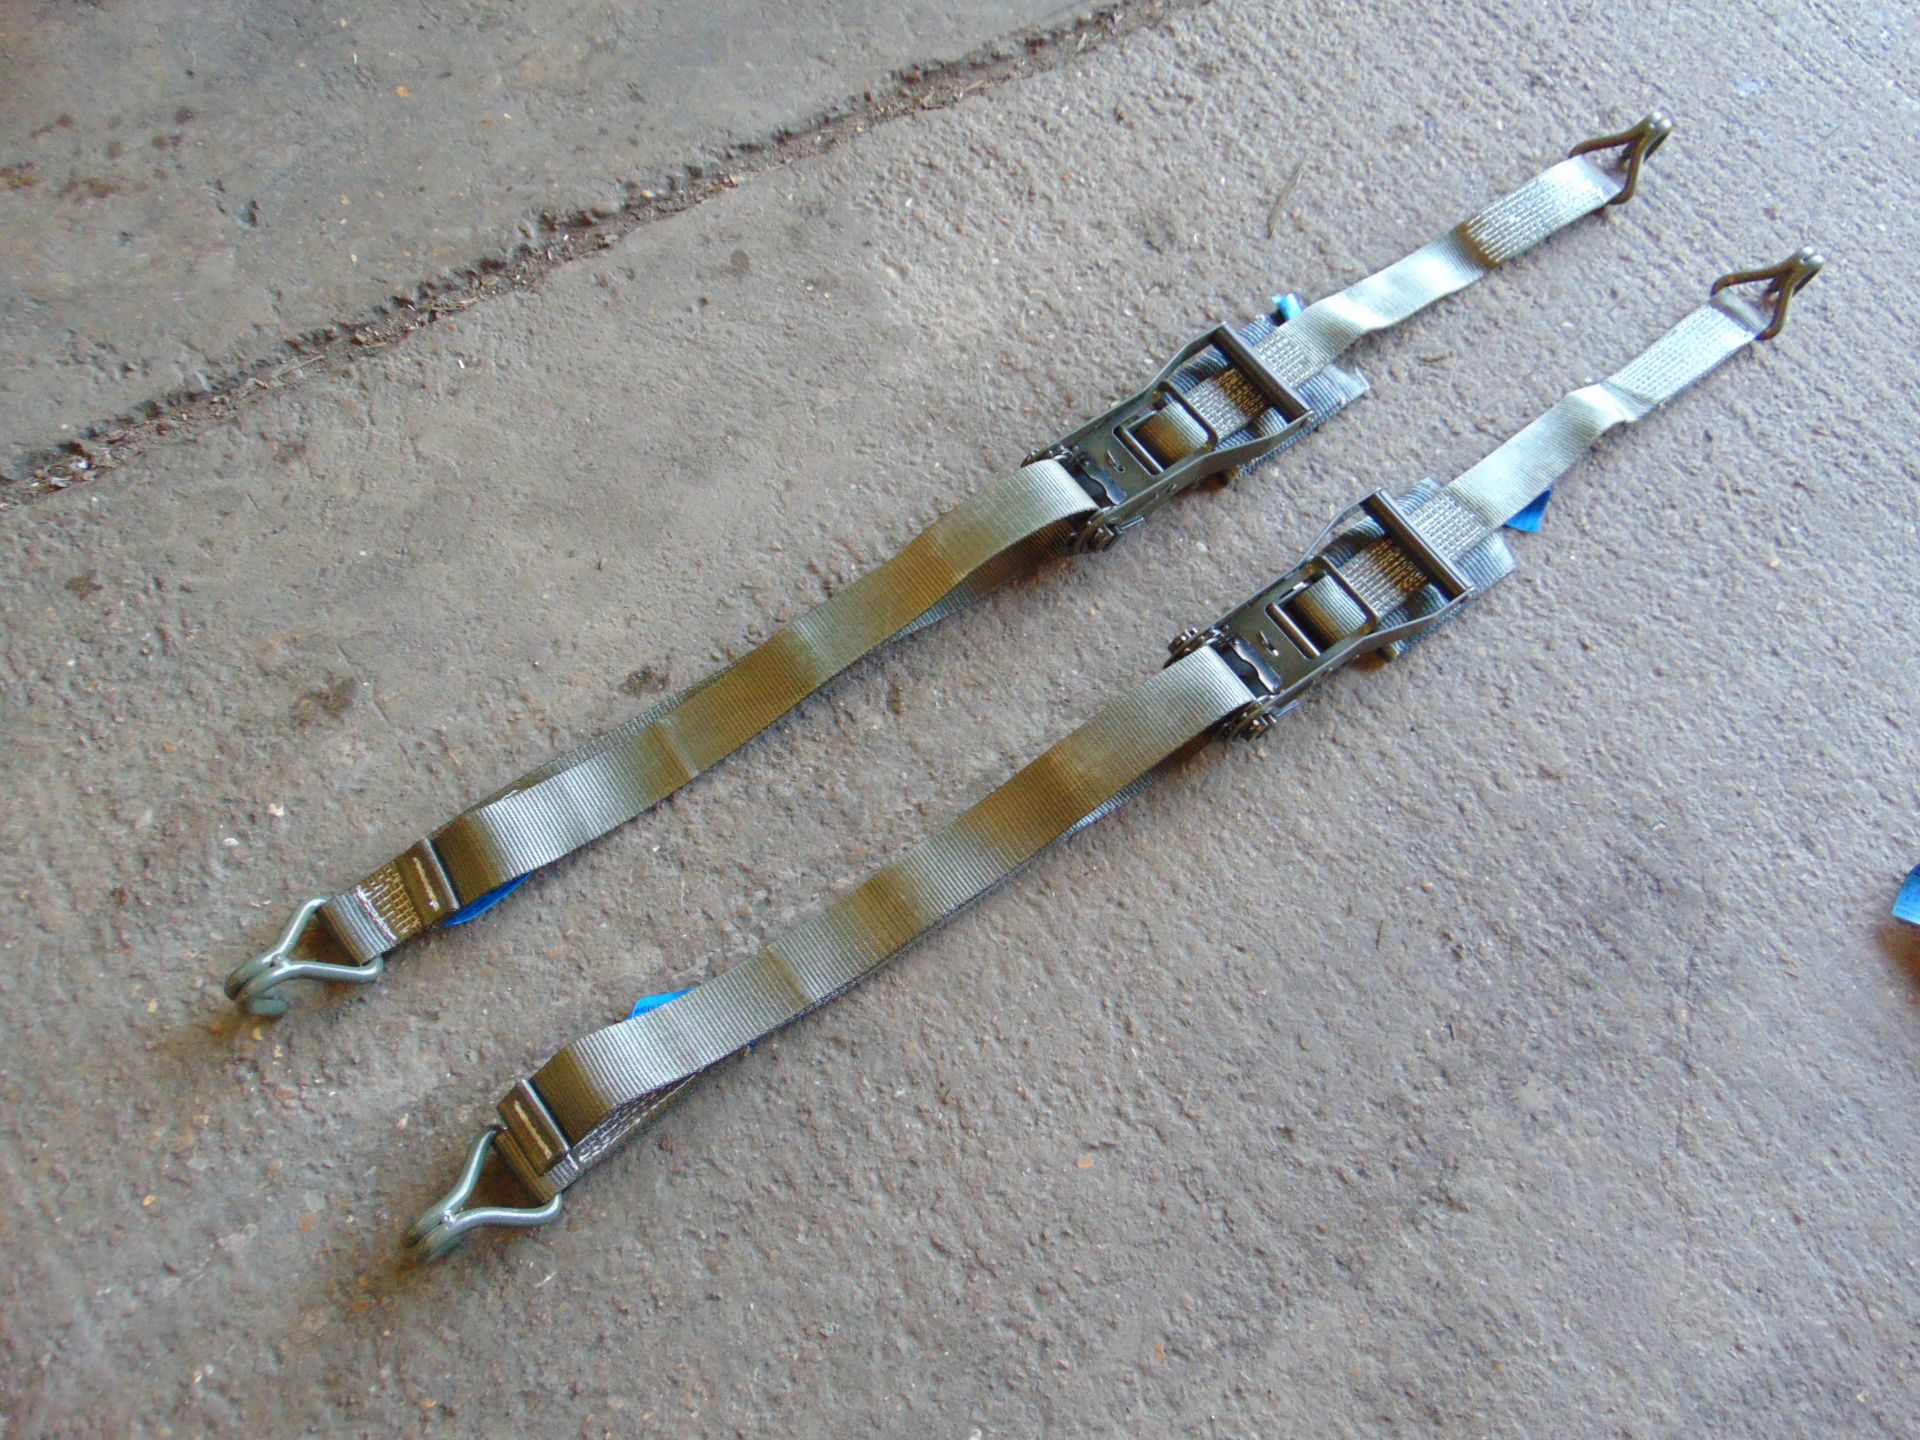 2 x Unissued SpanSet Ratchets and Straps as shown